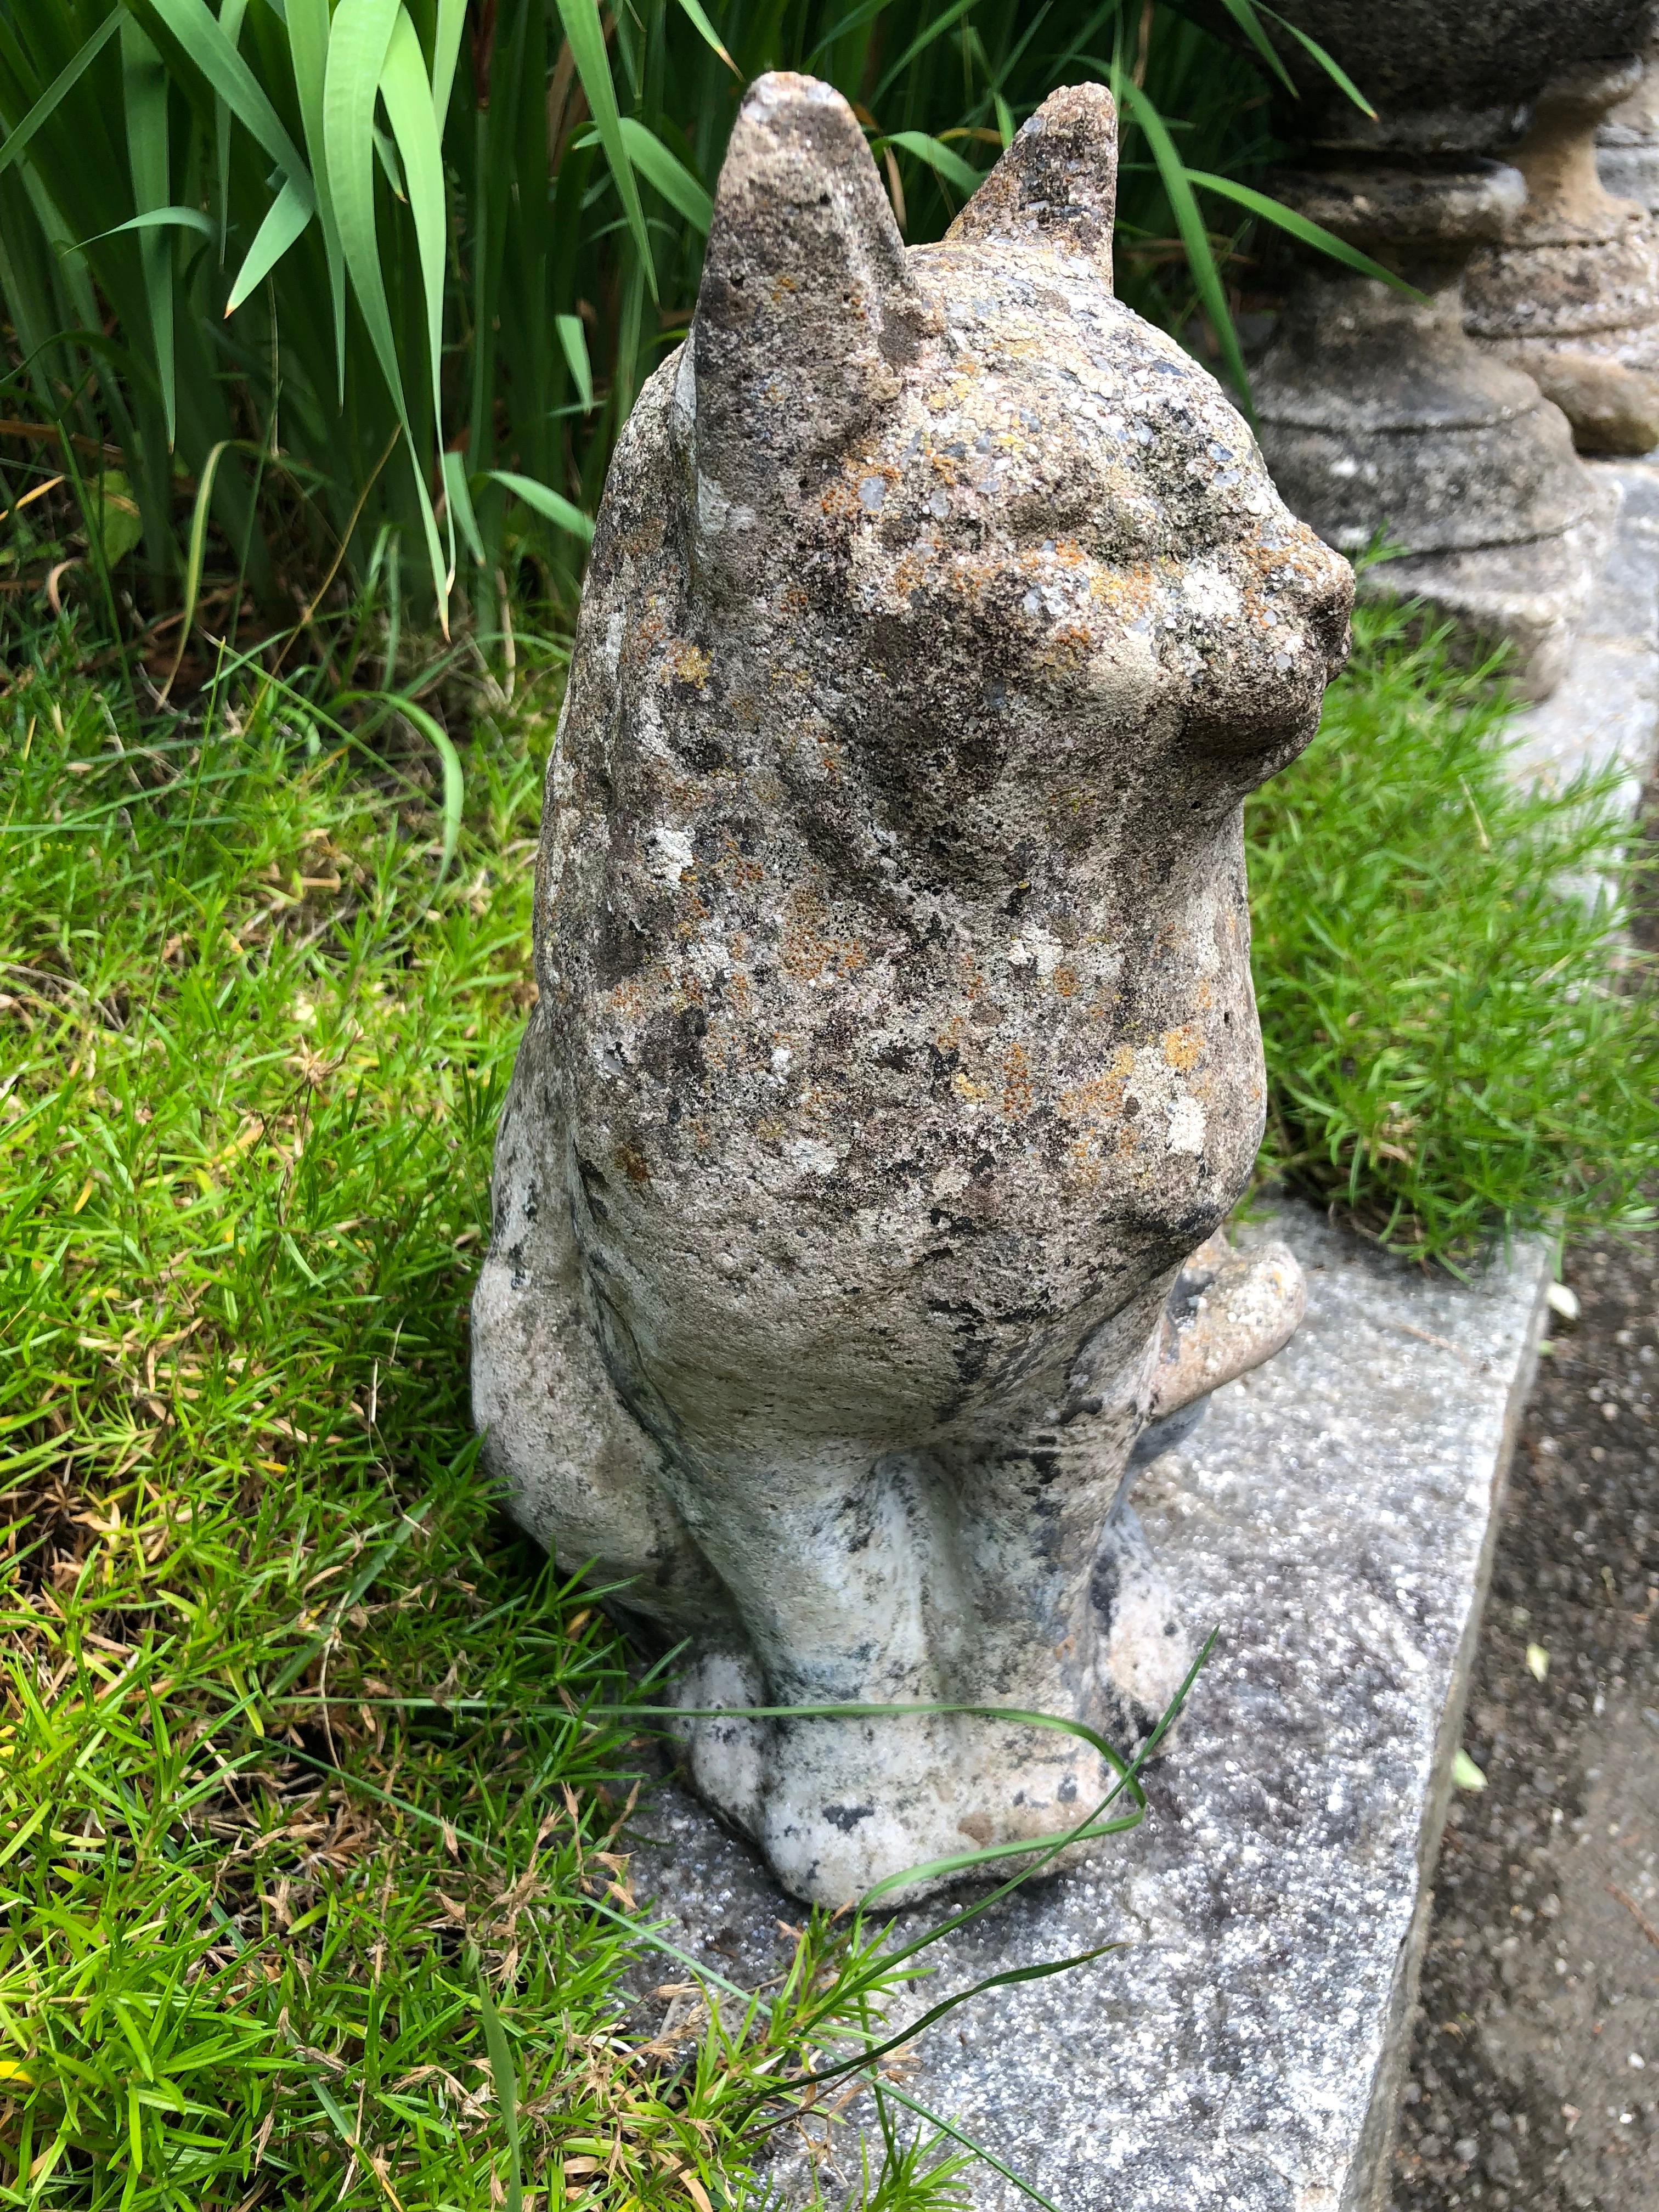 This little cutie is superbly weathered with loads of lichen and a bit of moss. Its facial expression is truly sweet and even though it has a weathered chip to one ear, it would make a stunning addition to your collection of garden animals, inside